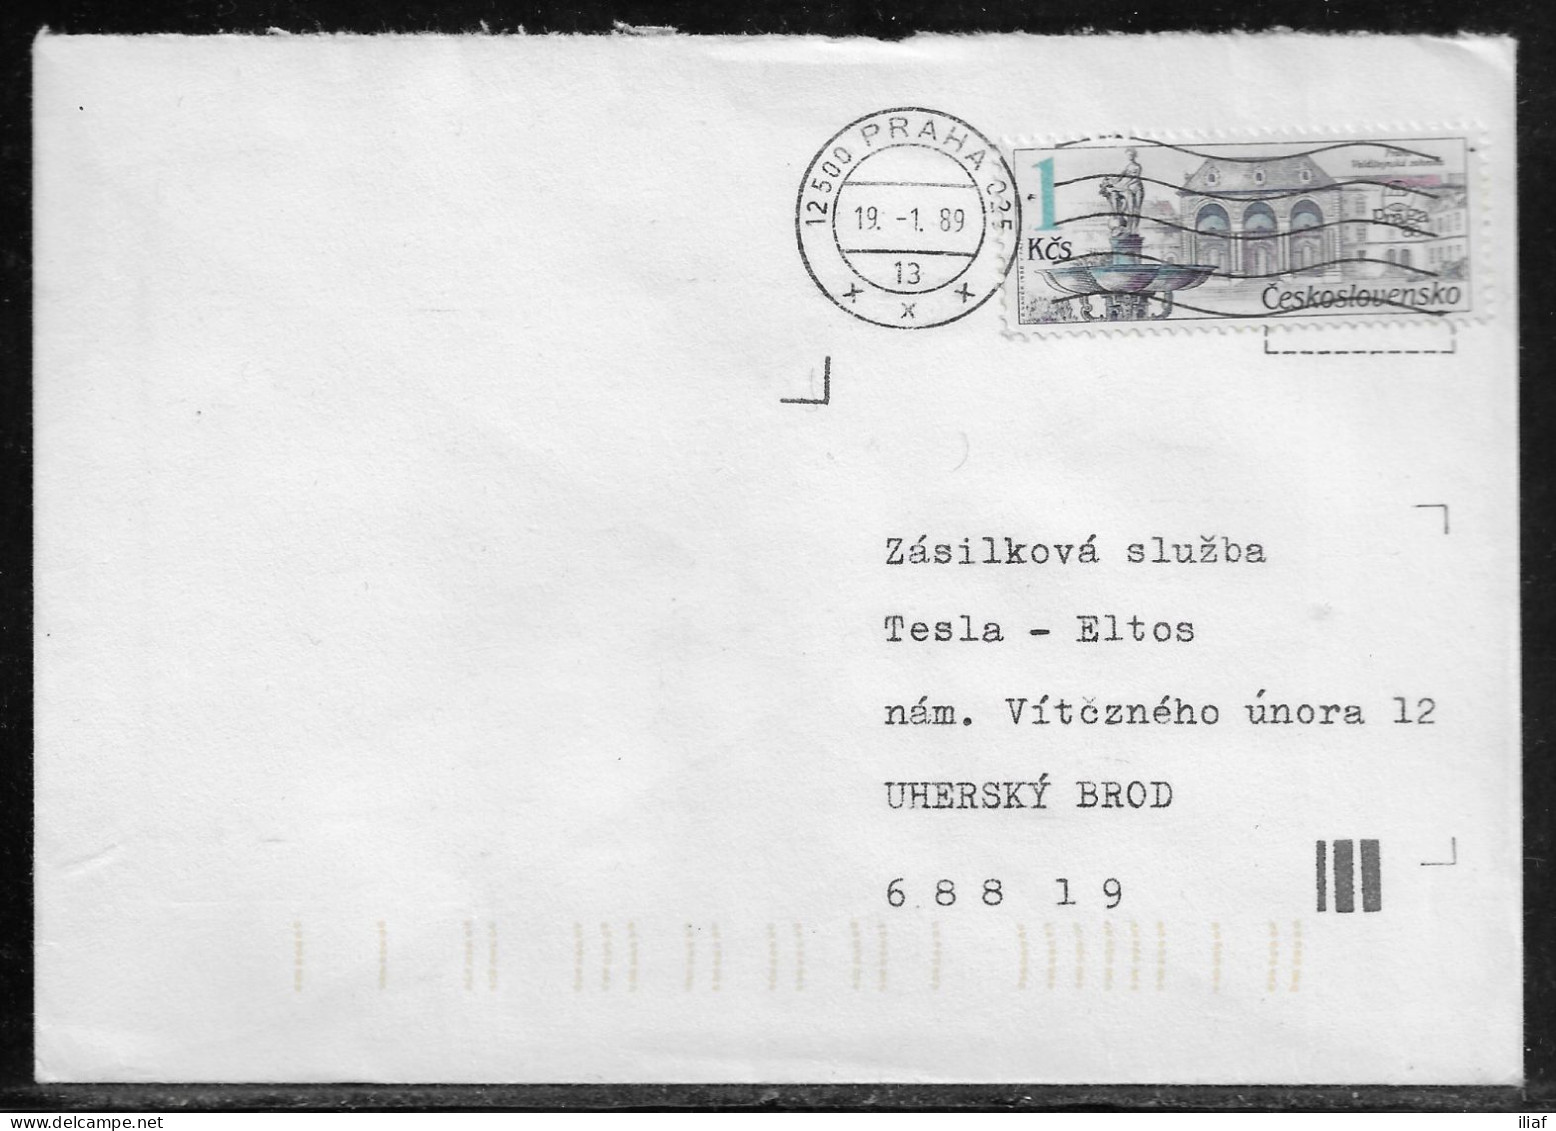 Czechoslovakia. Stamp Sc. 2705 On Letter, Sent From Praha On 19.01.89 For “Tesla” Uhersky Brod. - Covers & Documents